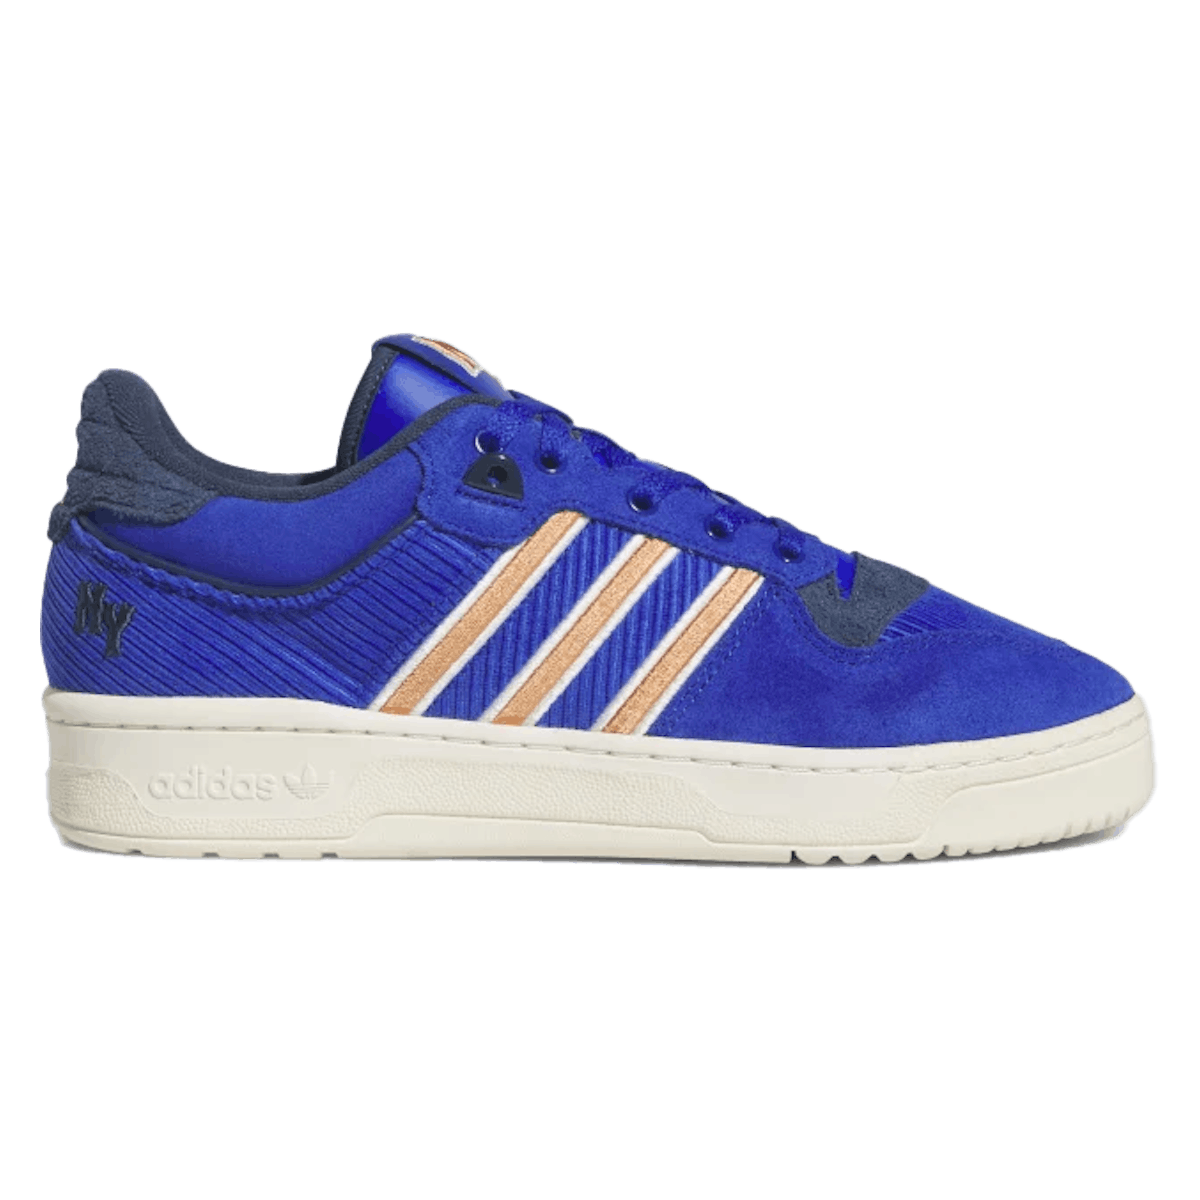 Adidas Rivalry Low 86 "Bold Blue"